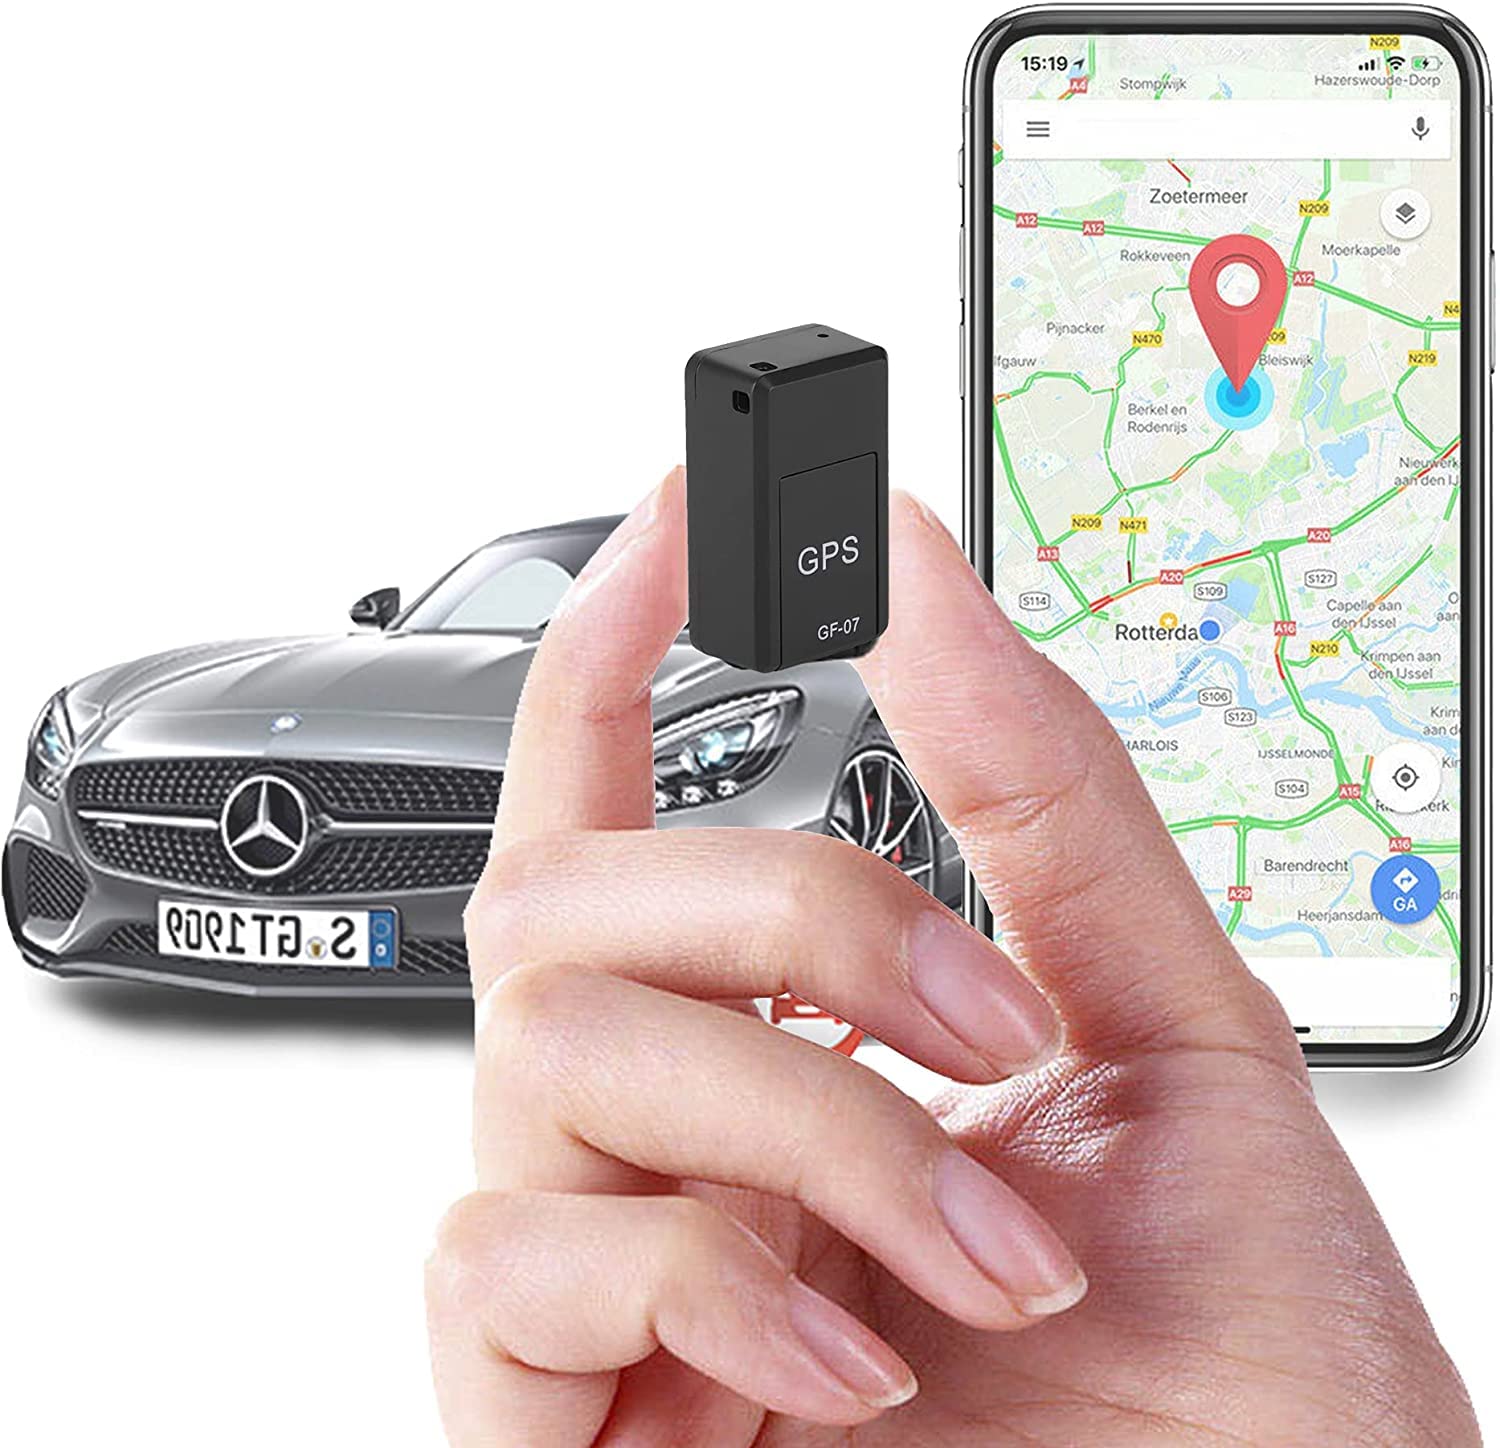 Buy a tracker for a car inexpensively in Volgograd.